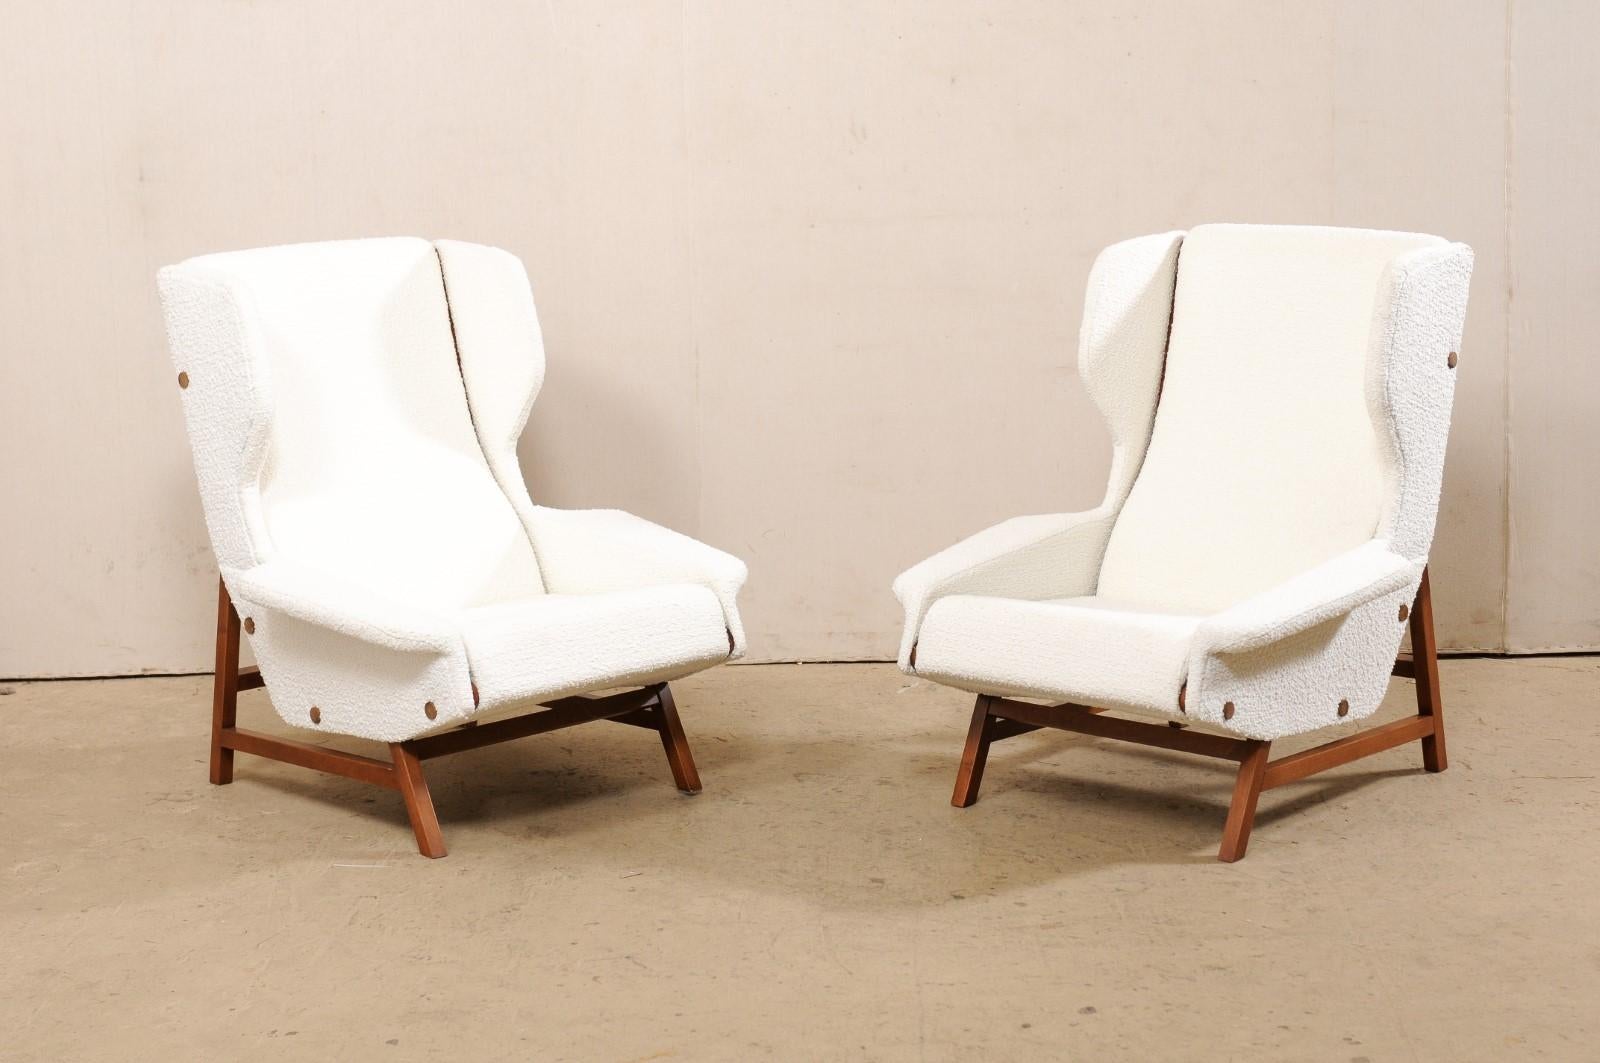 Italian Pair of Fashionably Modern Wingback Chairs with White Bouclé Upholstery For Sale 1